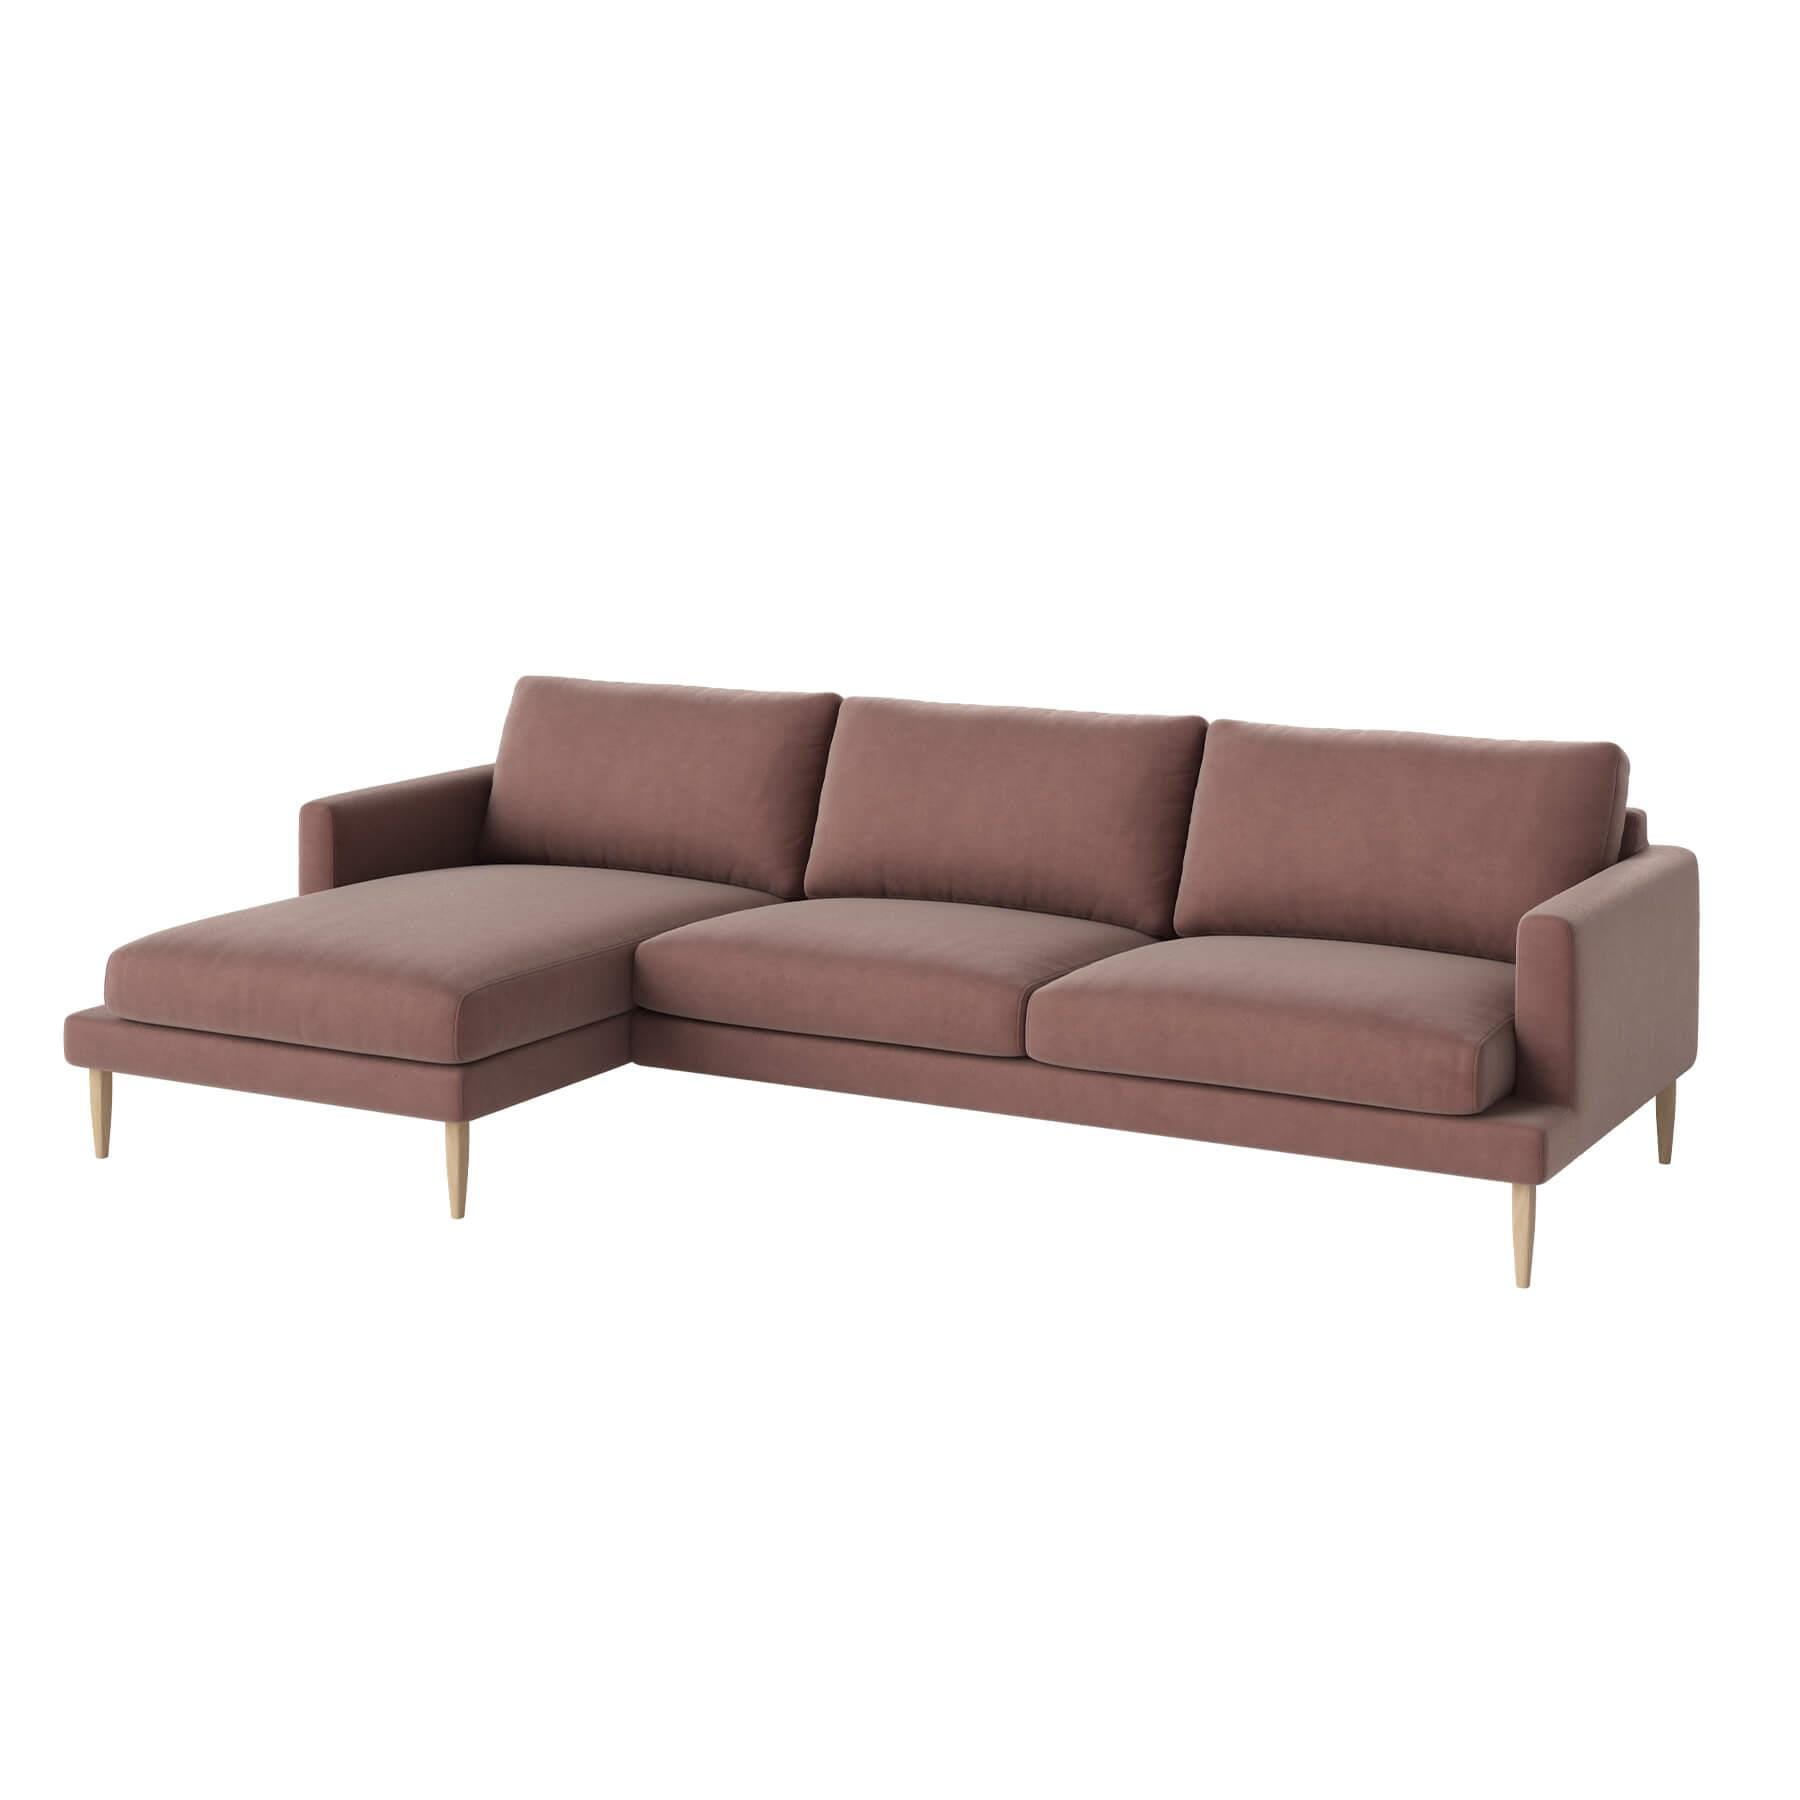 Bolia Veneda Sofa 35 Seater Sofa With Chaise Longue White Oiled Oak Ritz Light Rosa Left Pink Designer Furniture From Holloways Of Ludlow